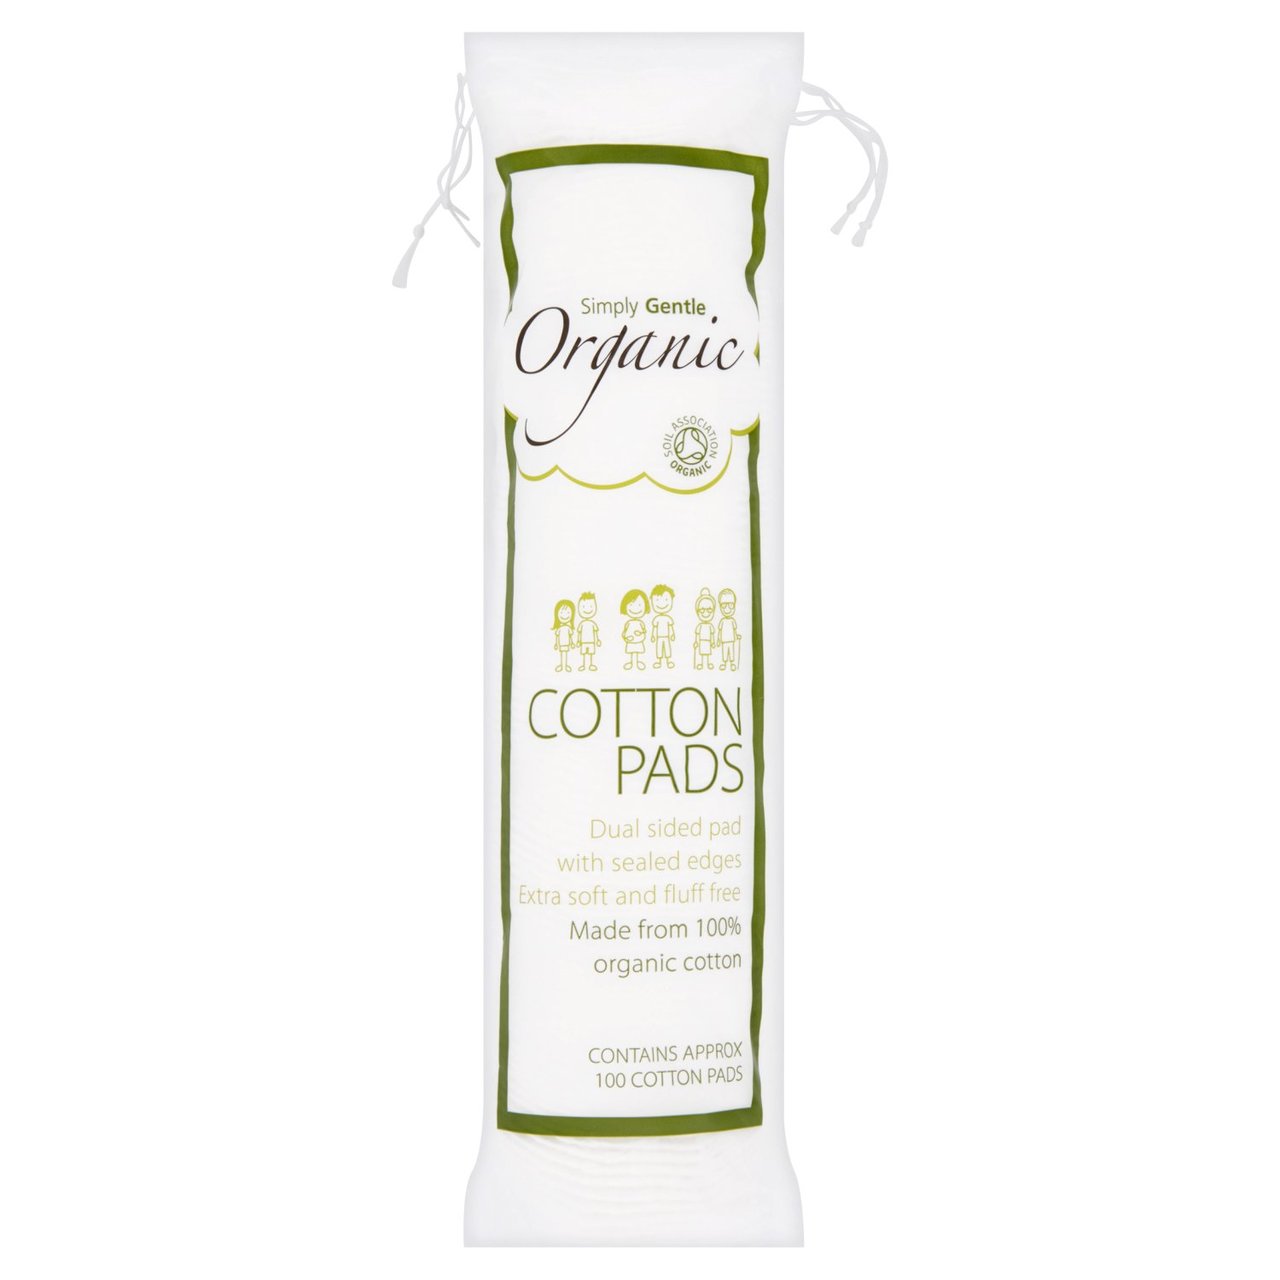 Simply Gentle Organic Cotton Pads 100 per pack